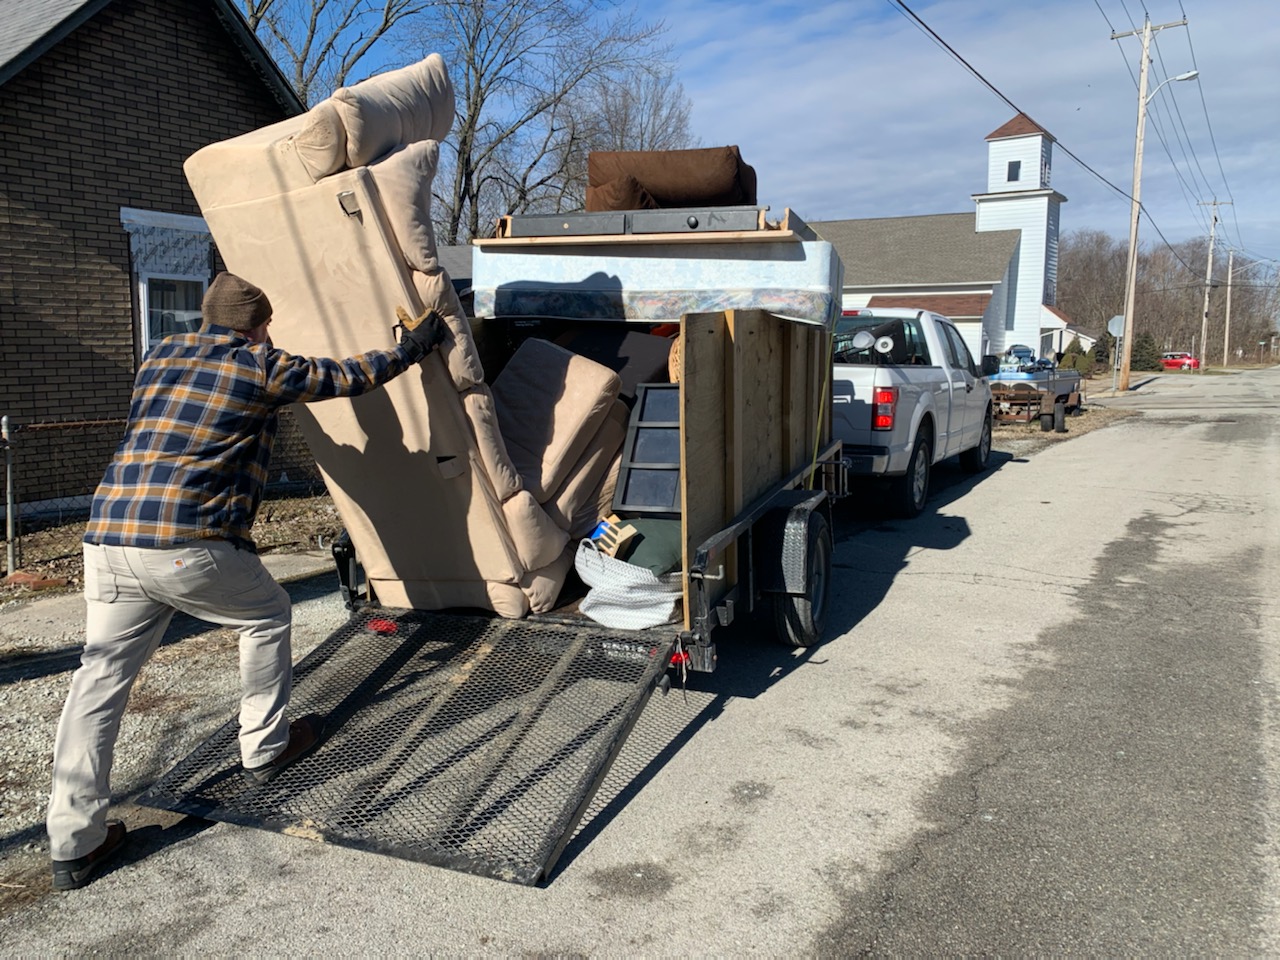 5-star commercial junk removal services in Indianapolis by Indy Trash Guy